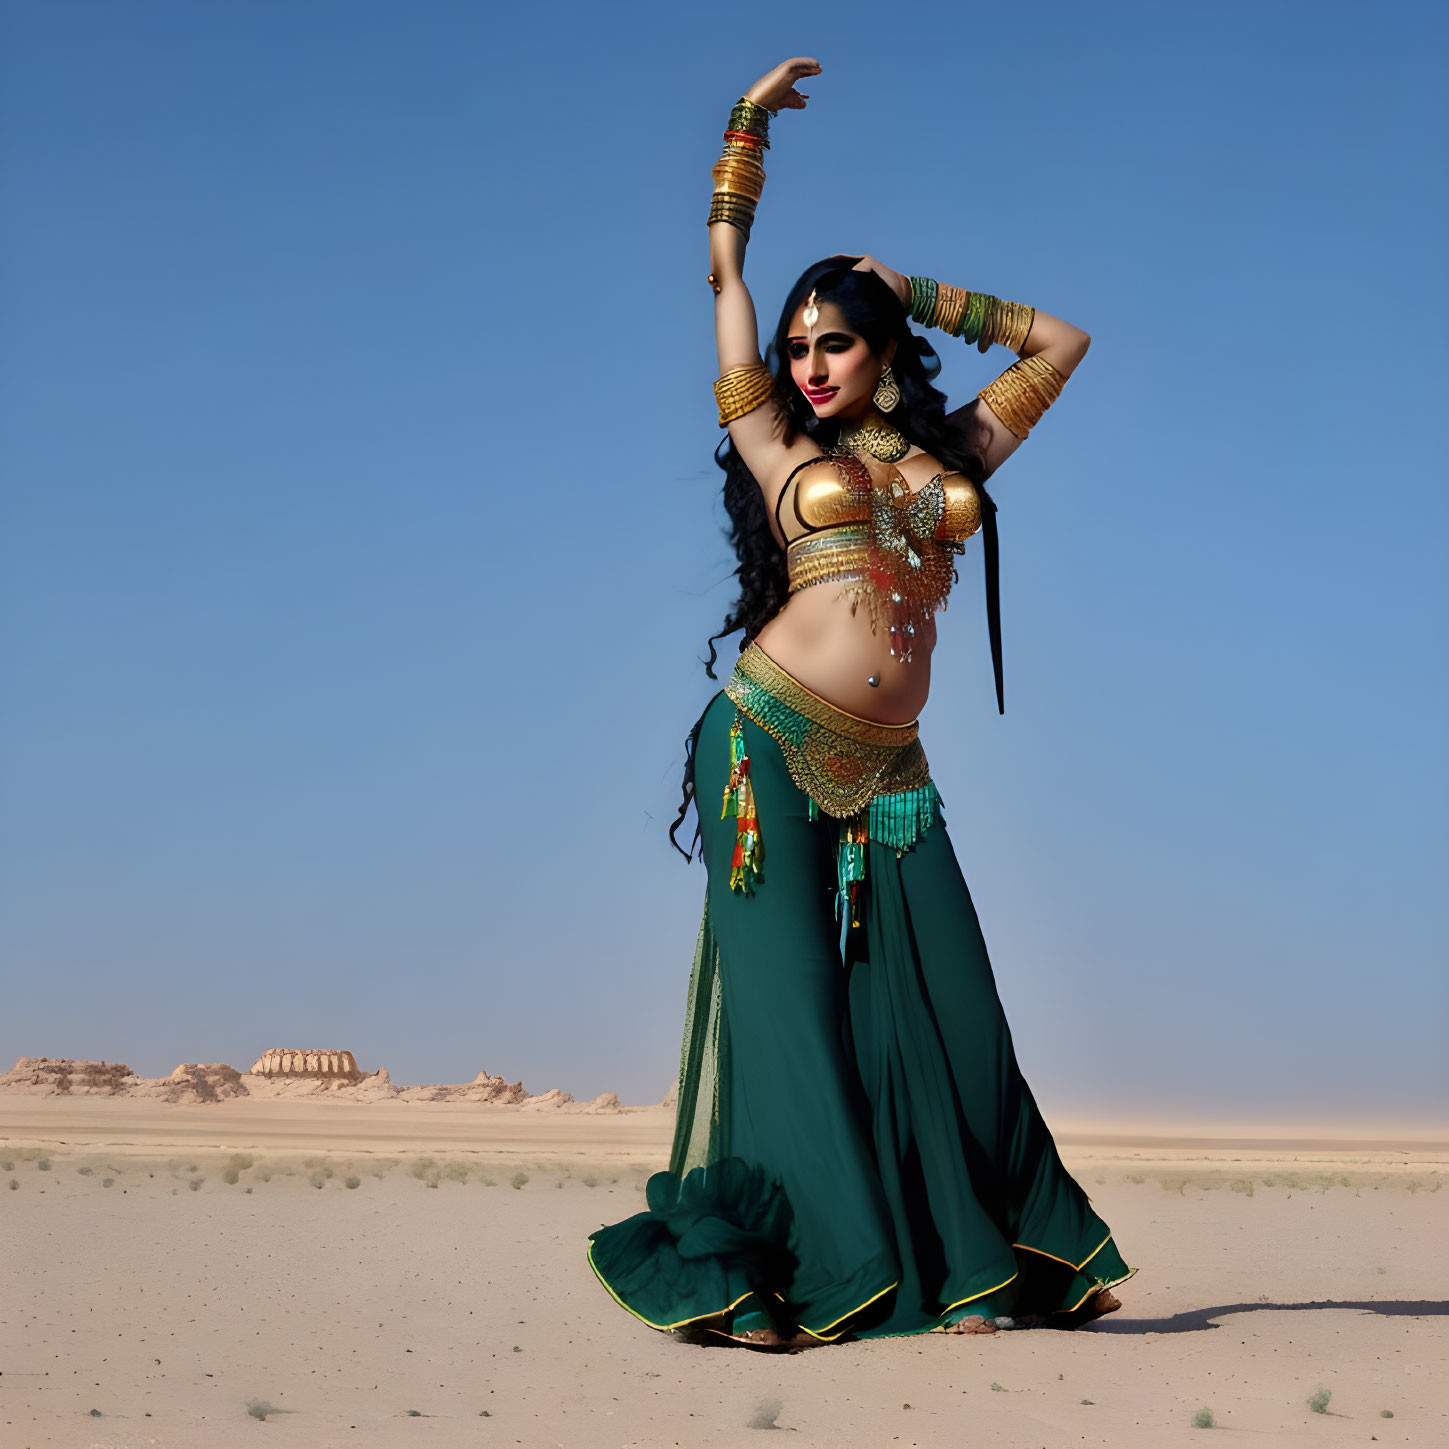 Elaborate belly dancing attire with gold accessories in desert setting